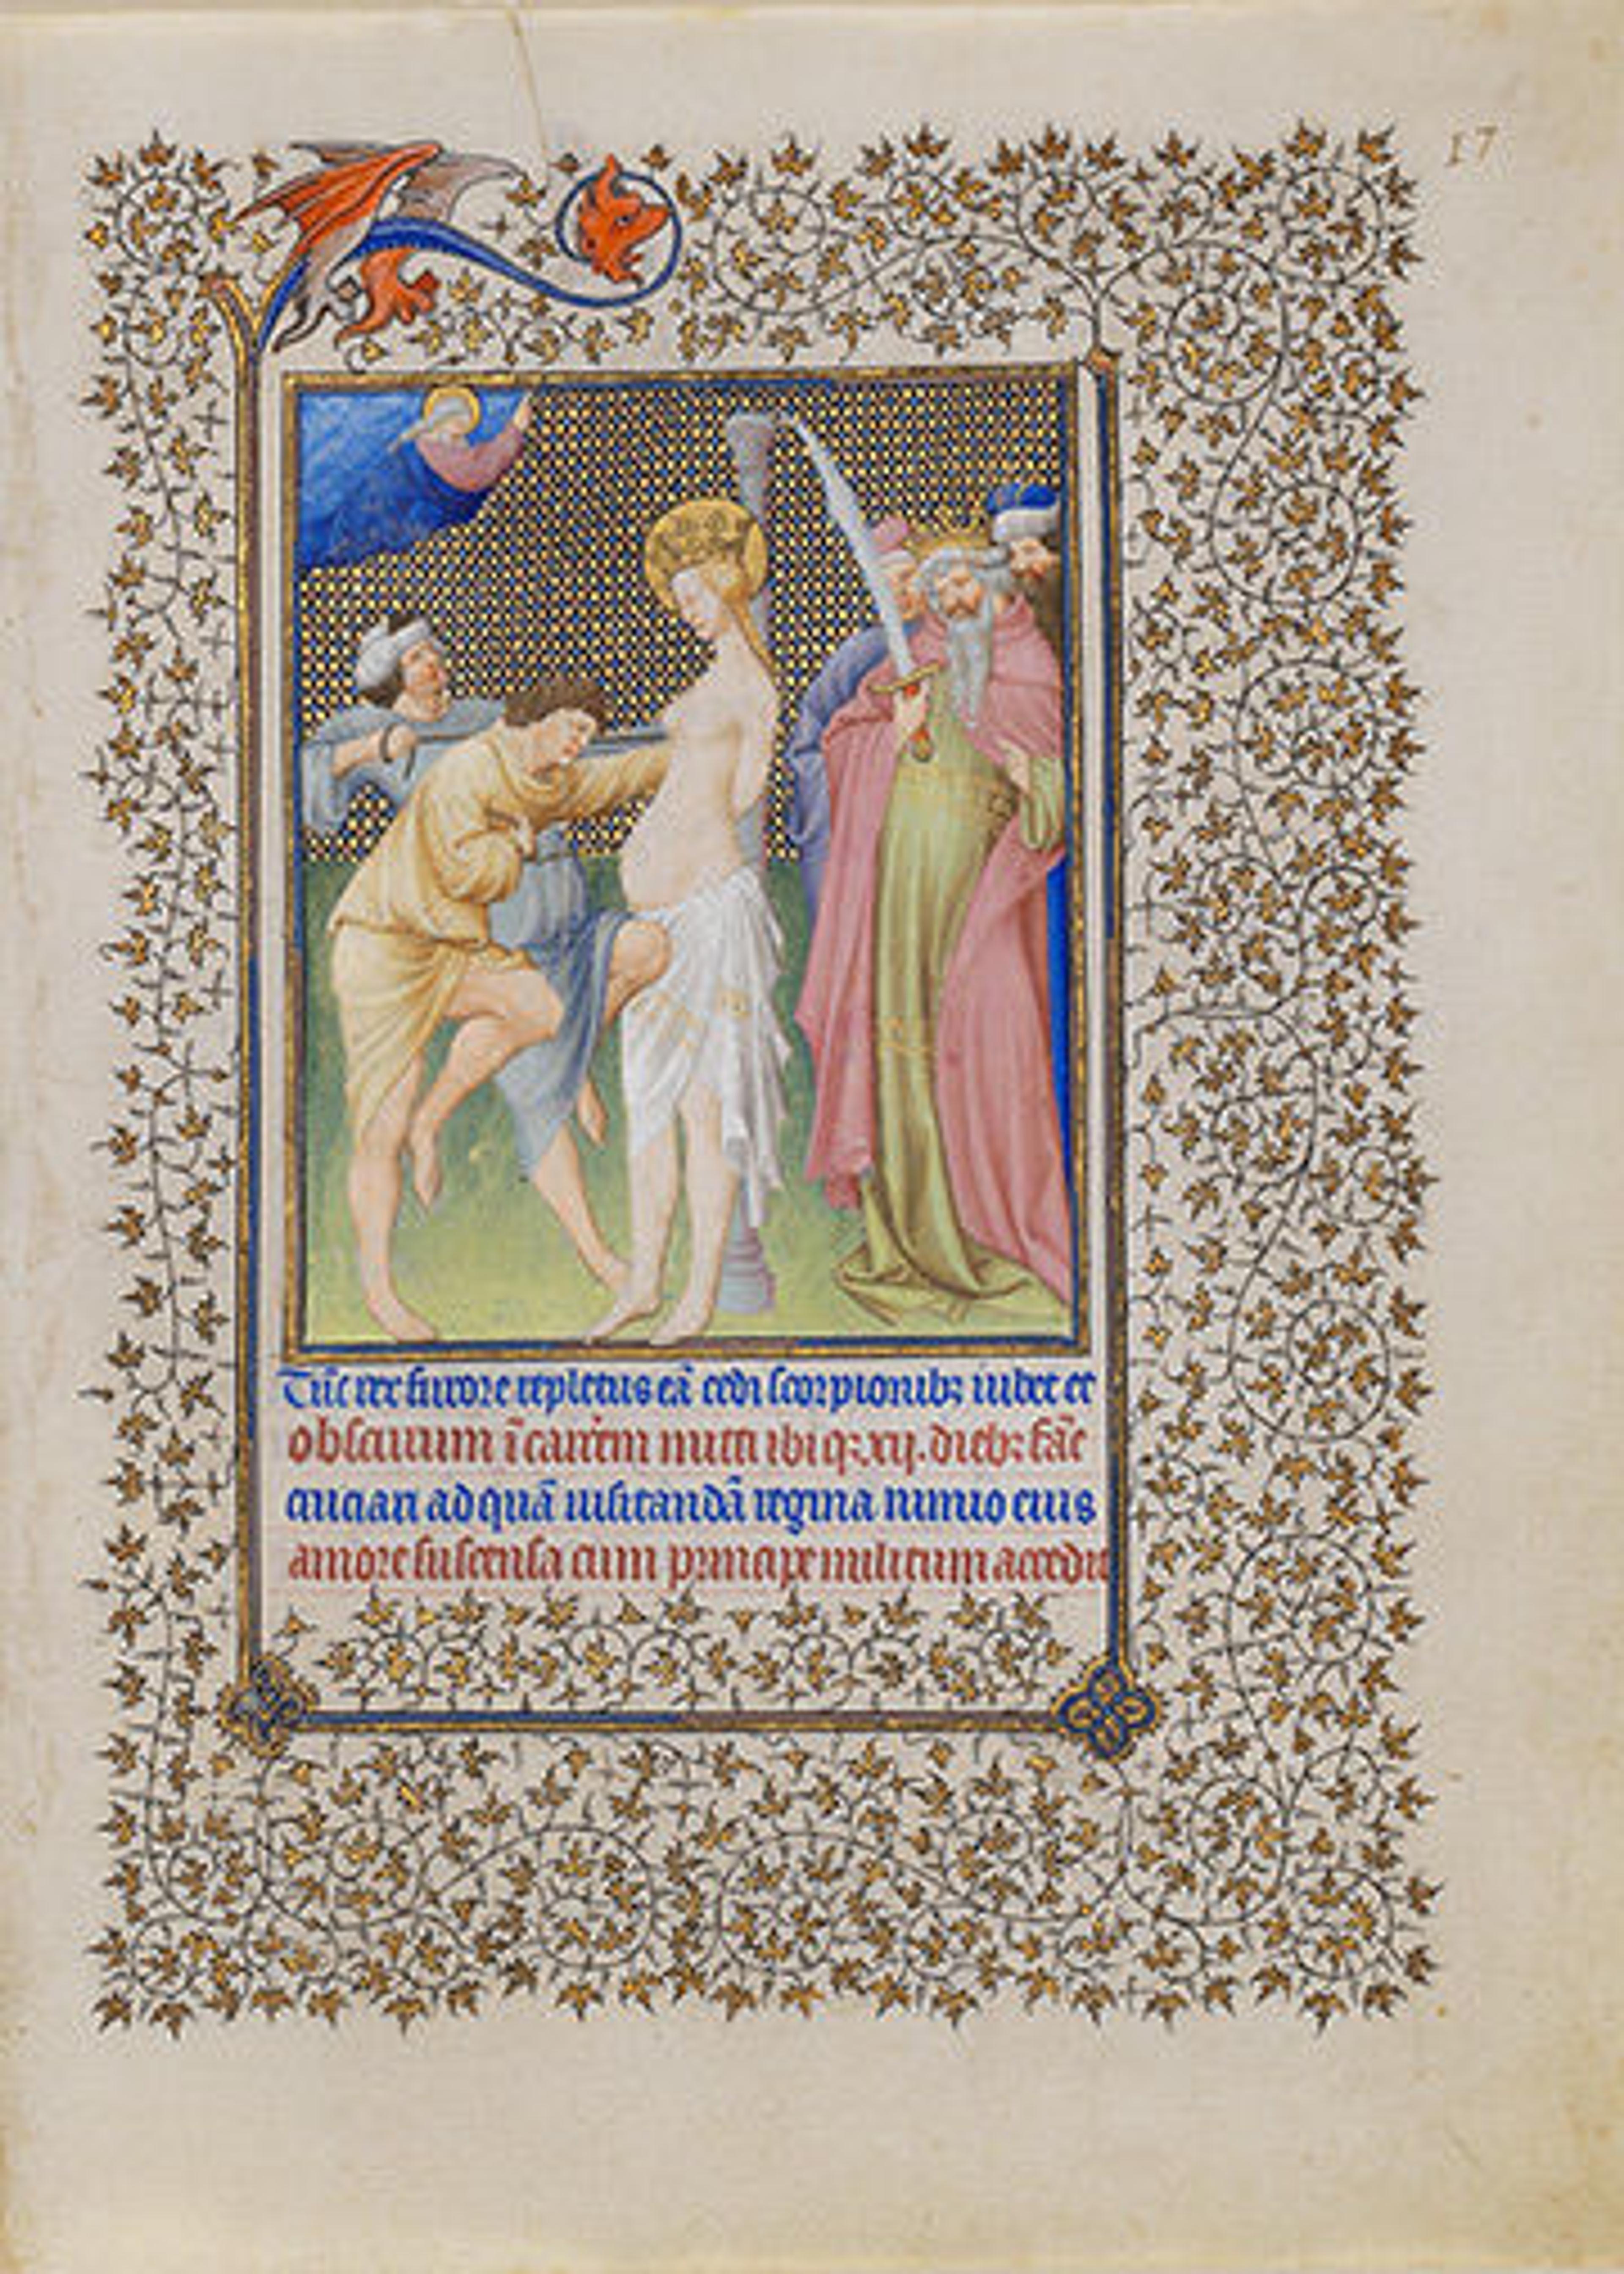 A page from a Book of Hours, depicting Saint Catherine being tortured